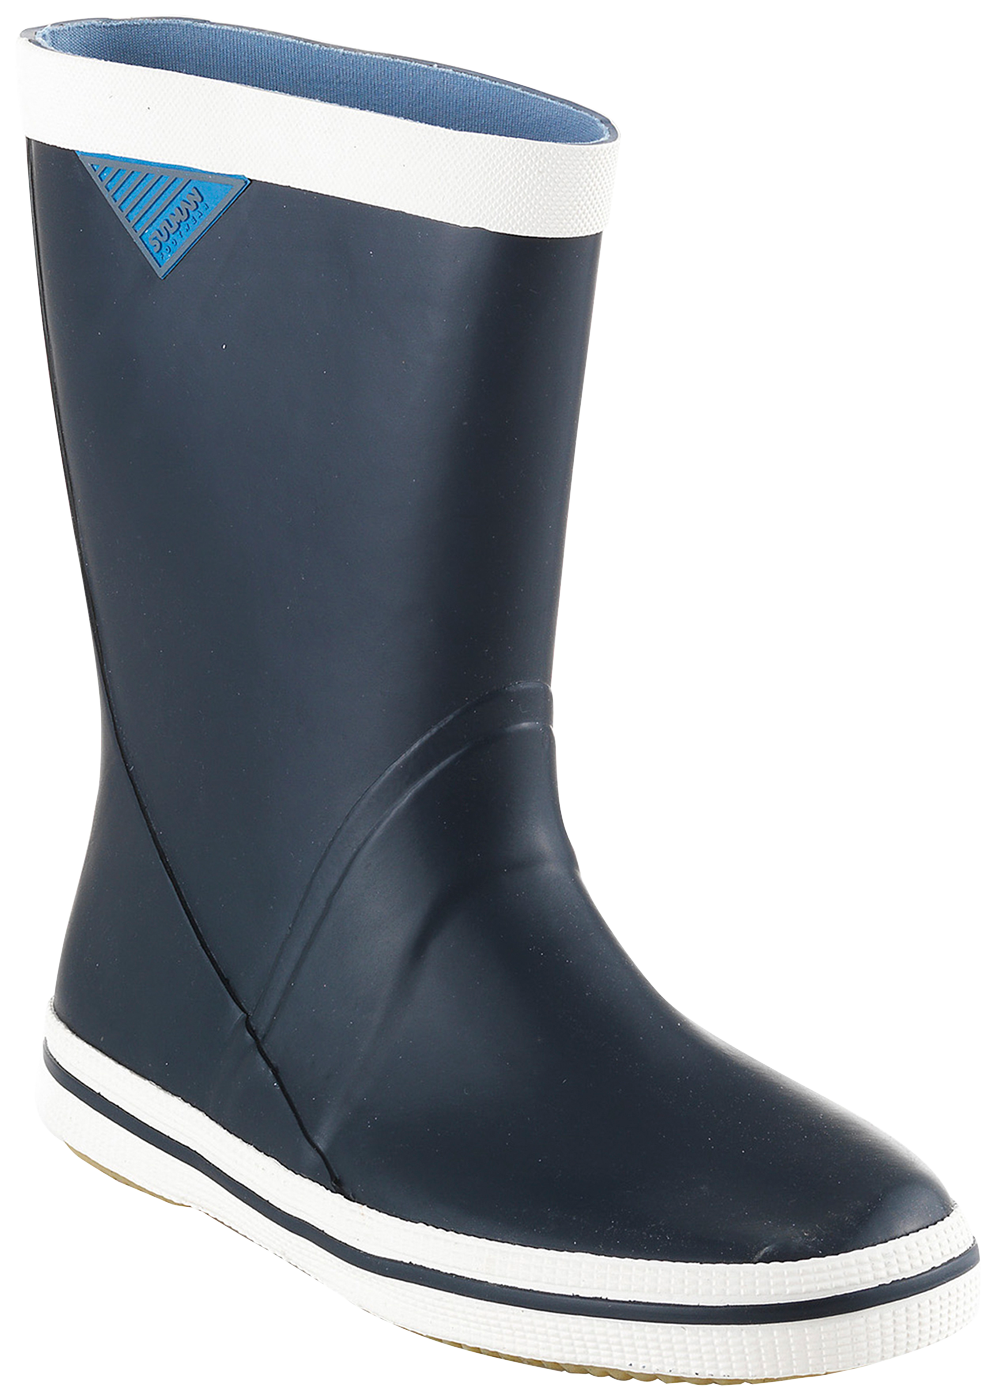 Rubber Boots Sulman Sail | B&B Safety